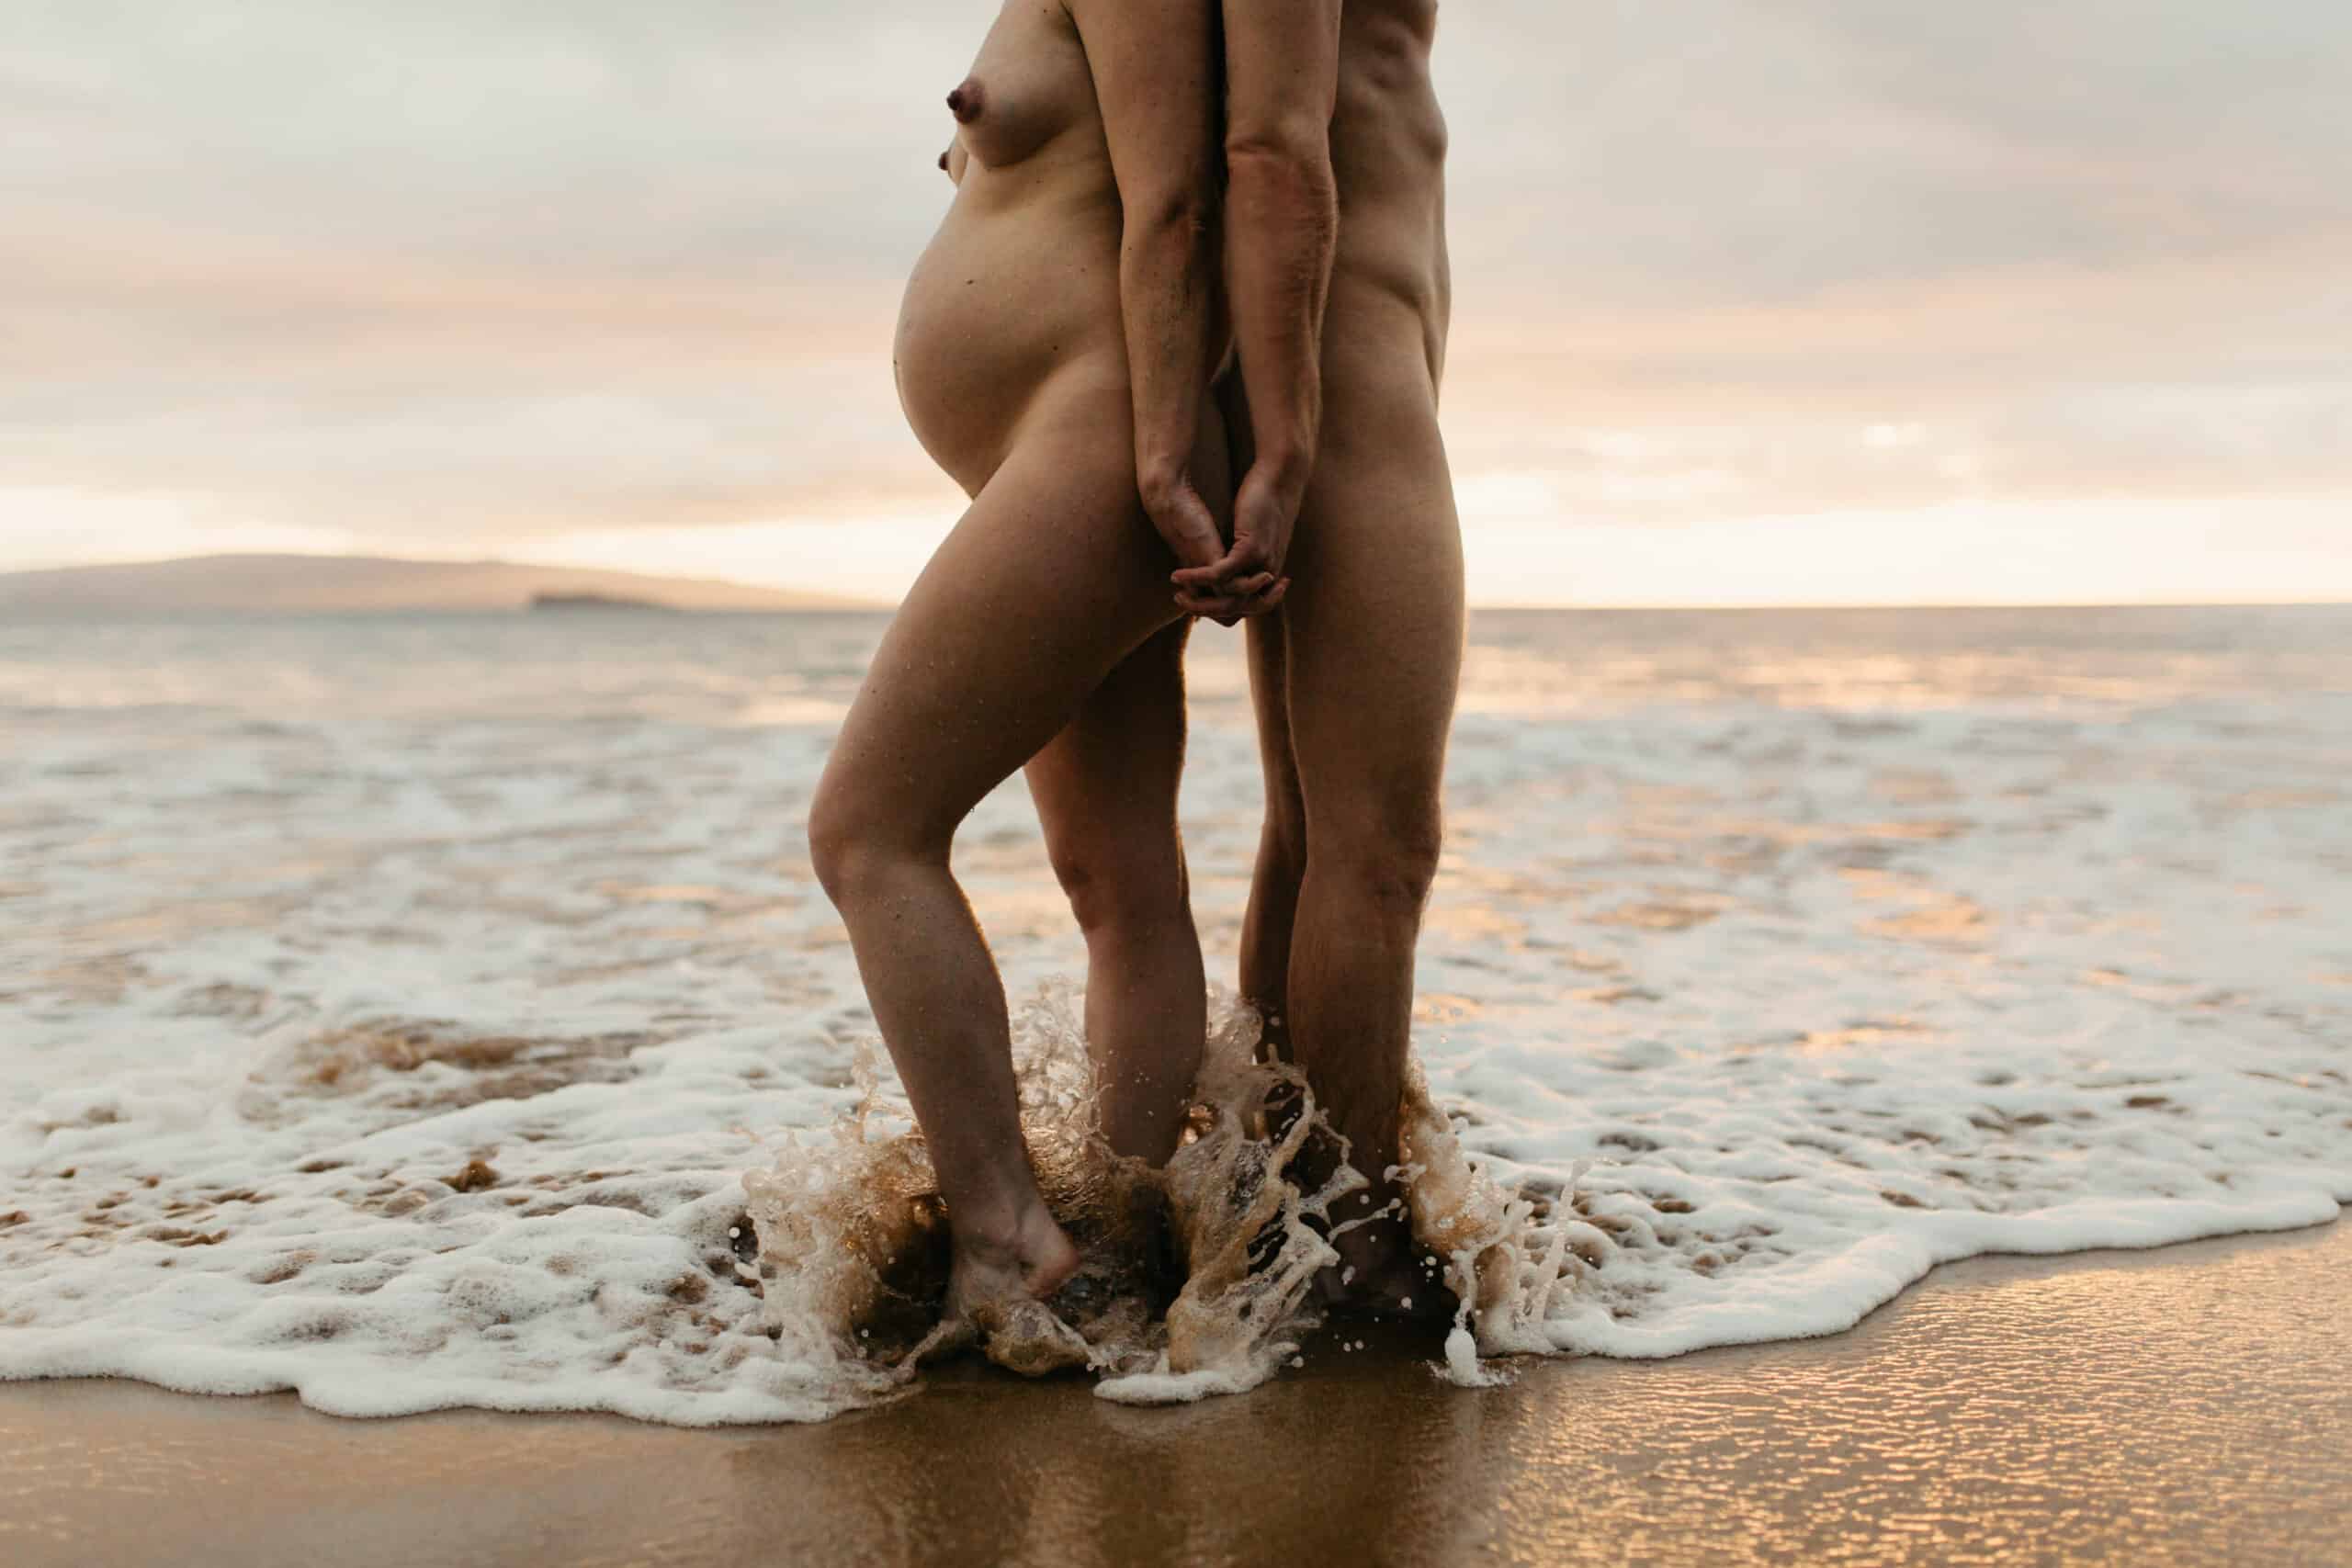 naked and artistic maternity photo with a couple on maui